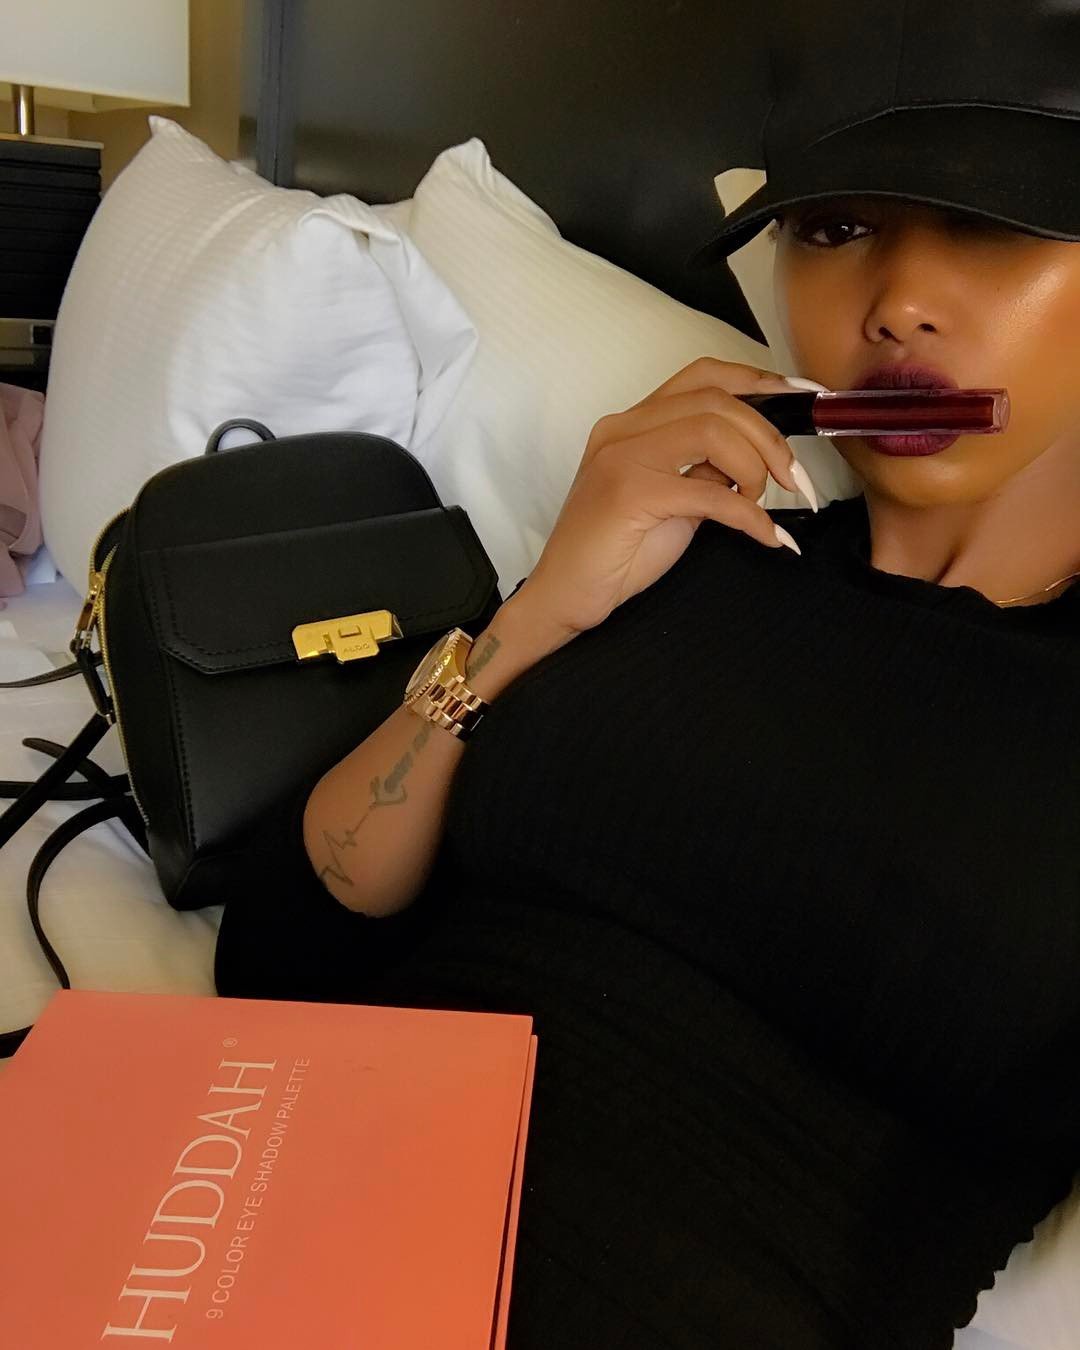 “I could’ve died but I’m well now” Huddah talks about the cosmetic surgery that almost cost her life